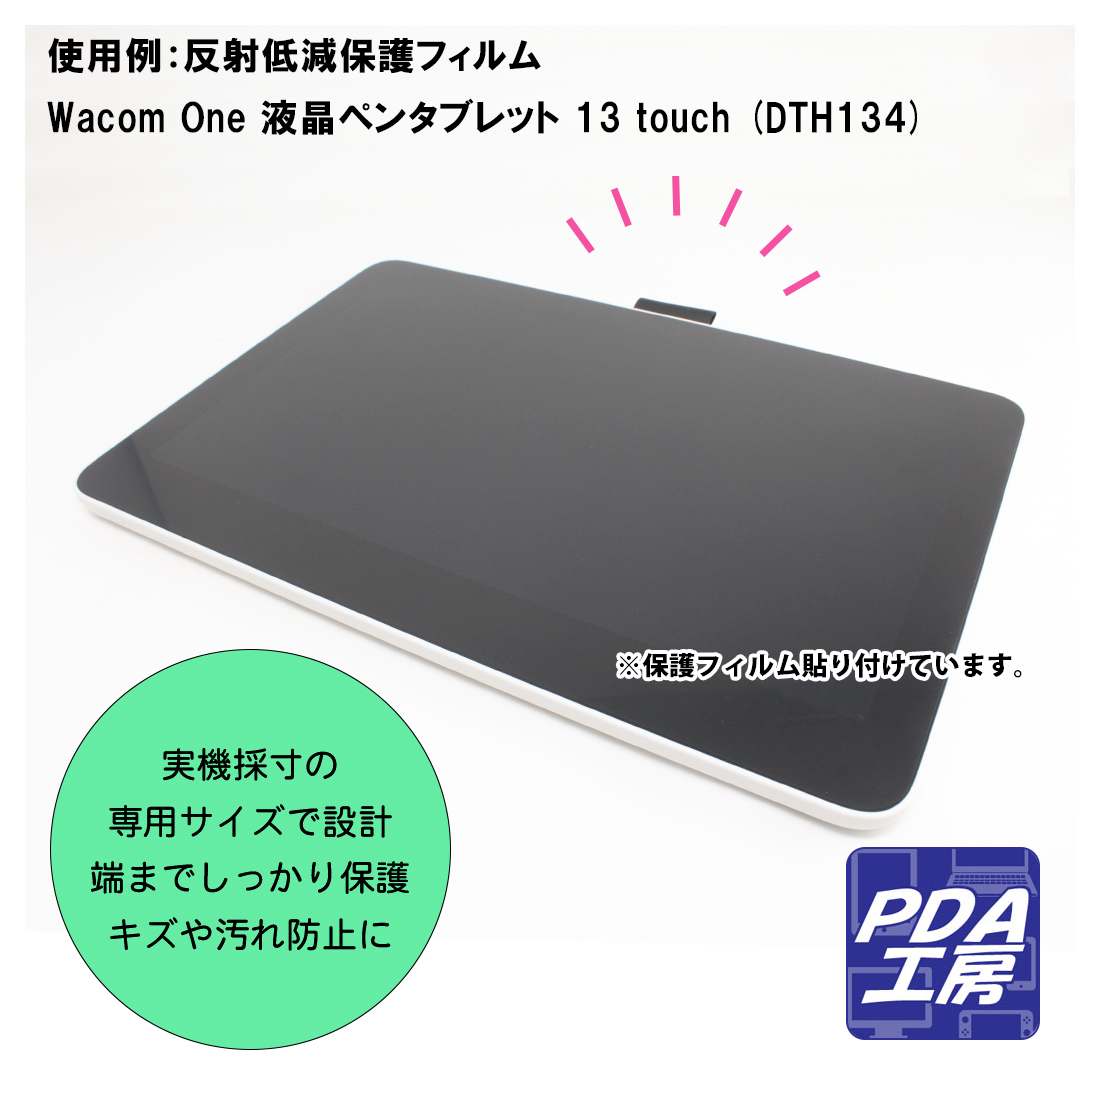 Wacom One 液晶ペンタブレット 13 touch (DTH134) 対応 Crystal Shield 保護 フィルム 光沢 日本製｜pdar｜03